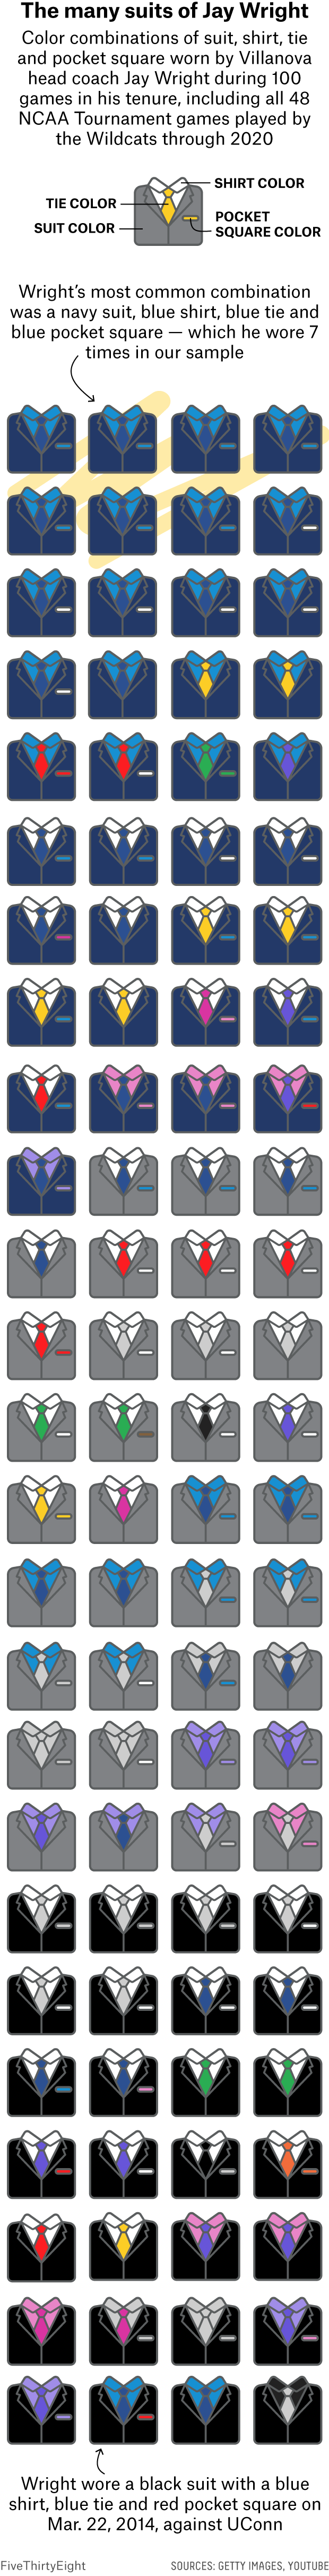 Grid of suit icons showing the color combinations of suit, shirt, ties, and pocket squares worn by Villanova Jay Wright during 48 NCAA Tournament games and 52 regular-season games, though the 2020 season. Wright’s most common combination was a navy suit, blue shirt, blue tie, and blue pocket square — which he wore seven times in our sample.